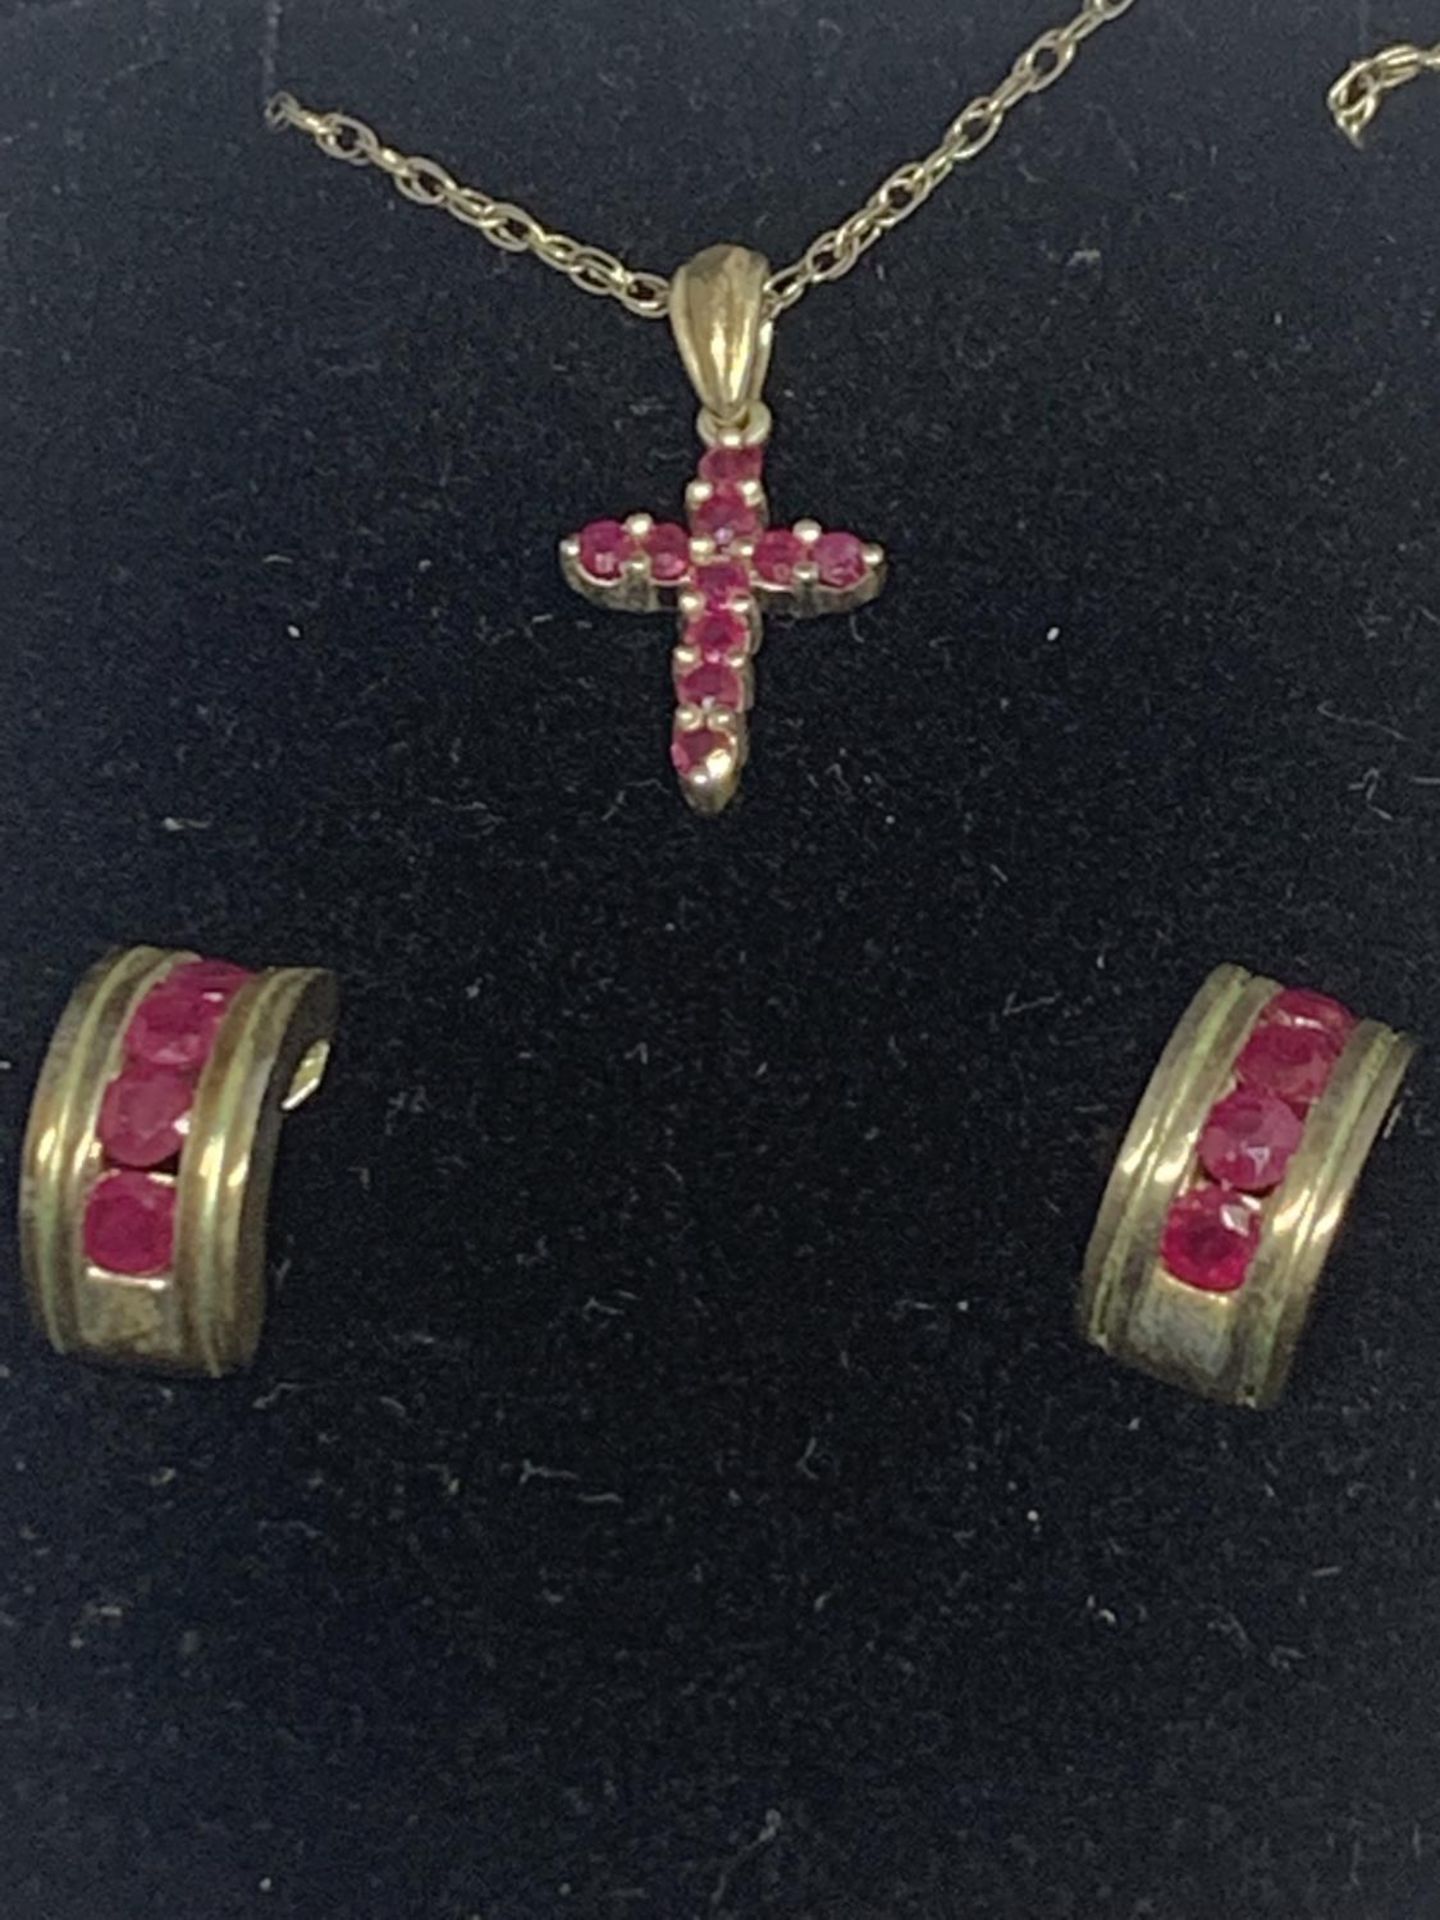 A SILVER NECKLACE WITH A RUBY CROSS PENDANT AND A PAIR OF MATCHING EARRINGS IN A PRESENTATION BOX - Image 2 of 4